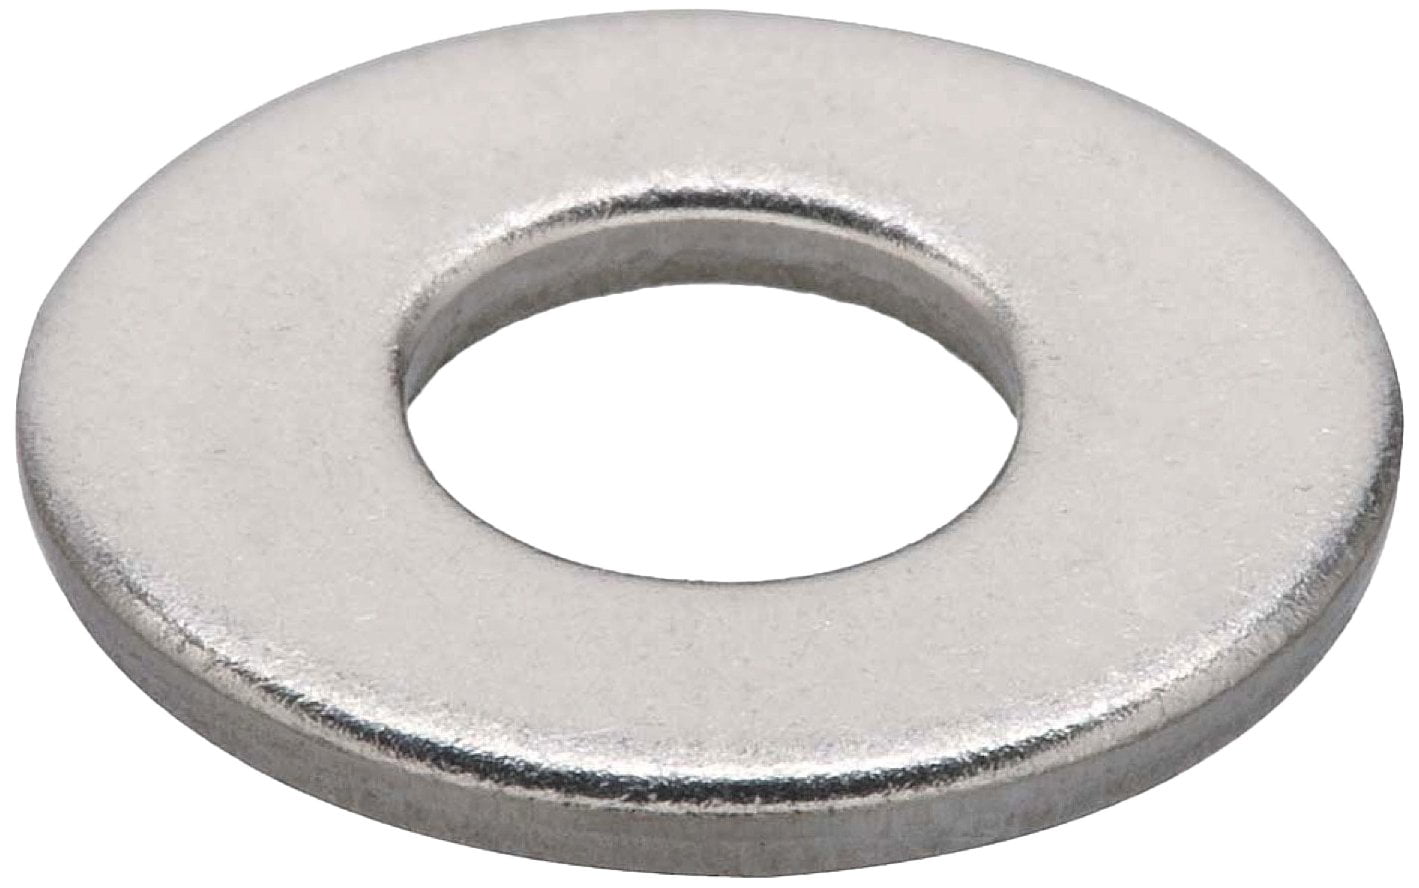 Qty 100 316 Stainless Steel Fender Washer 10 x 1